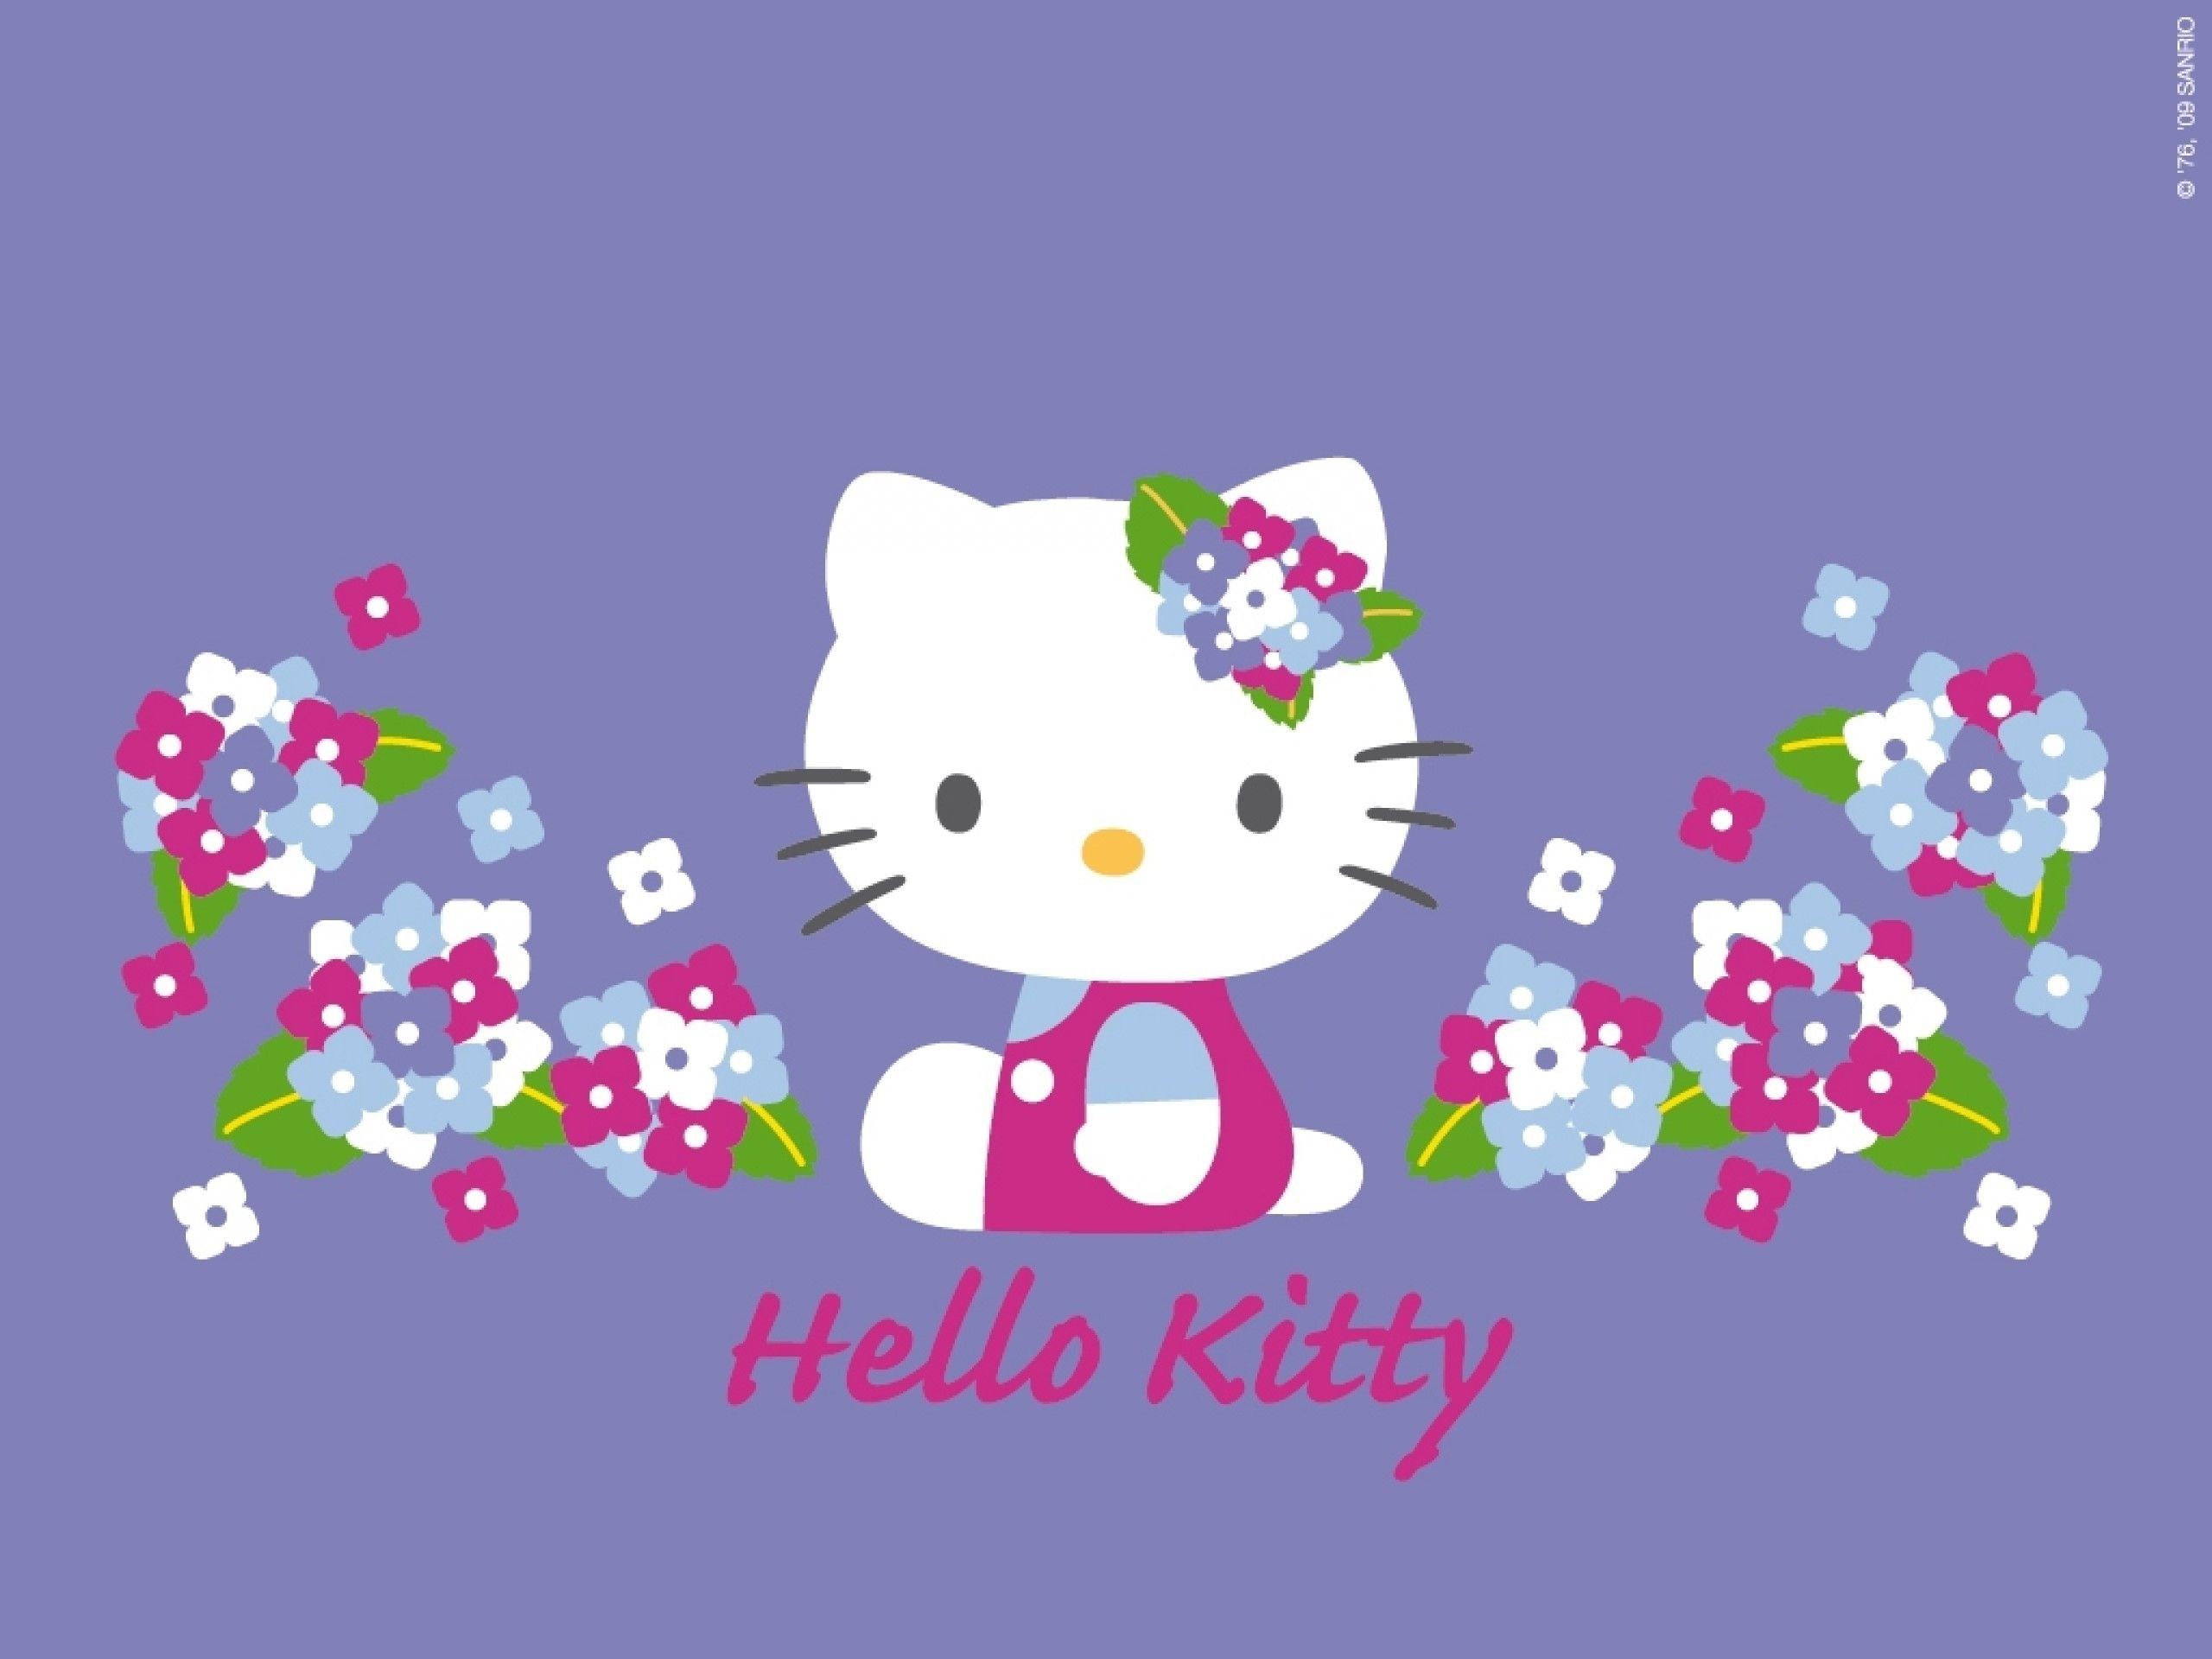 Hello Kitty with flowers on a purple background - Sanrio